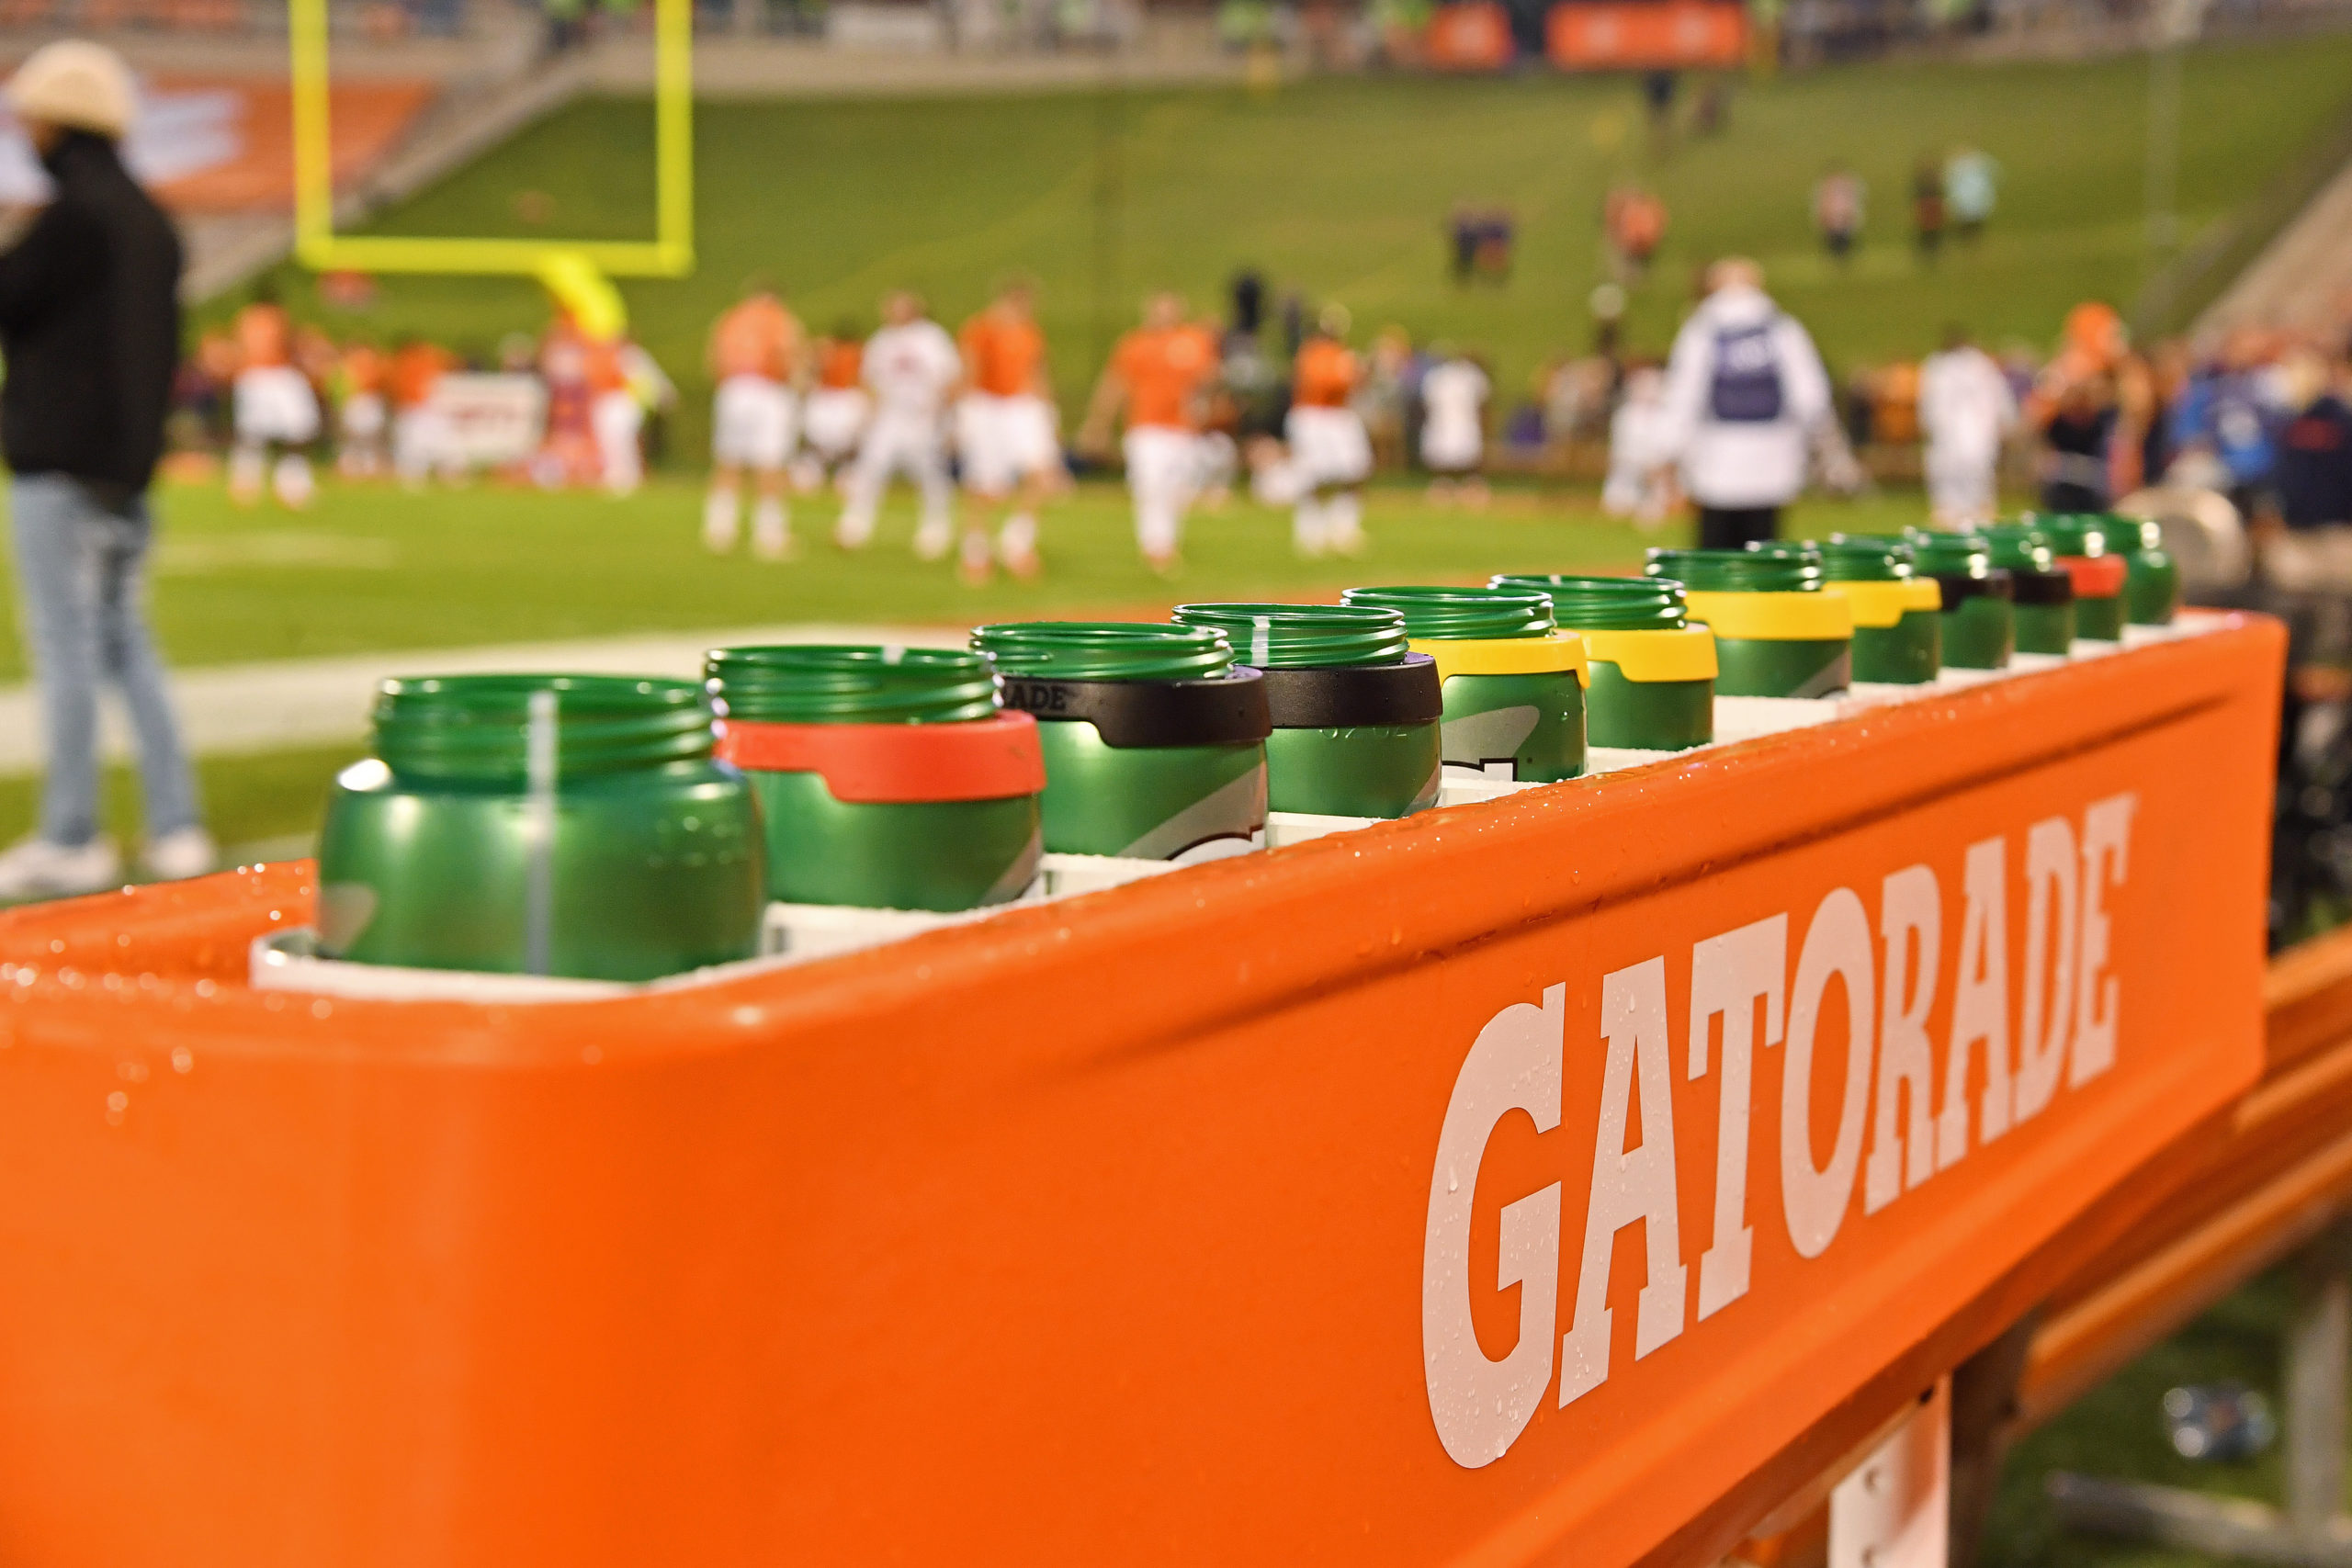 CLEMSON, SC - OCTOBER 28, 2017: Gatorade bottles are prepared during the Clemson Tigers game versus the Georgia Tech Yellow Jackets on October 28, 2017, at Memorial Stadium in Clemson, SC. (Photo by David Yeazell/Icon Sportswire via Getty Images)